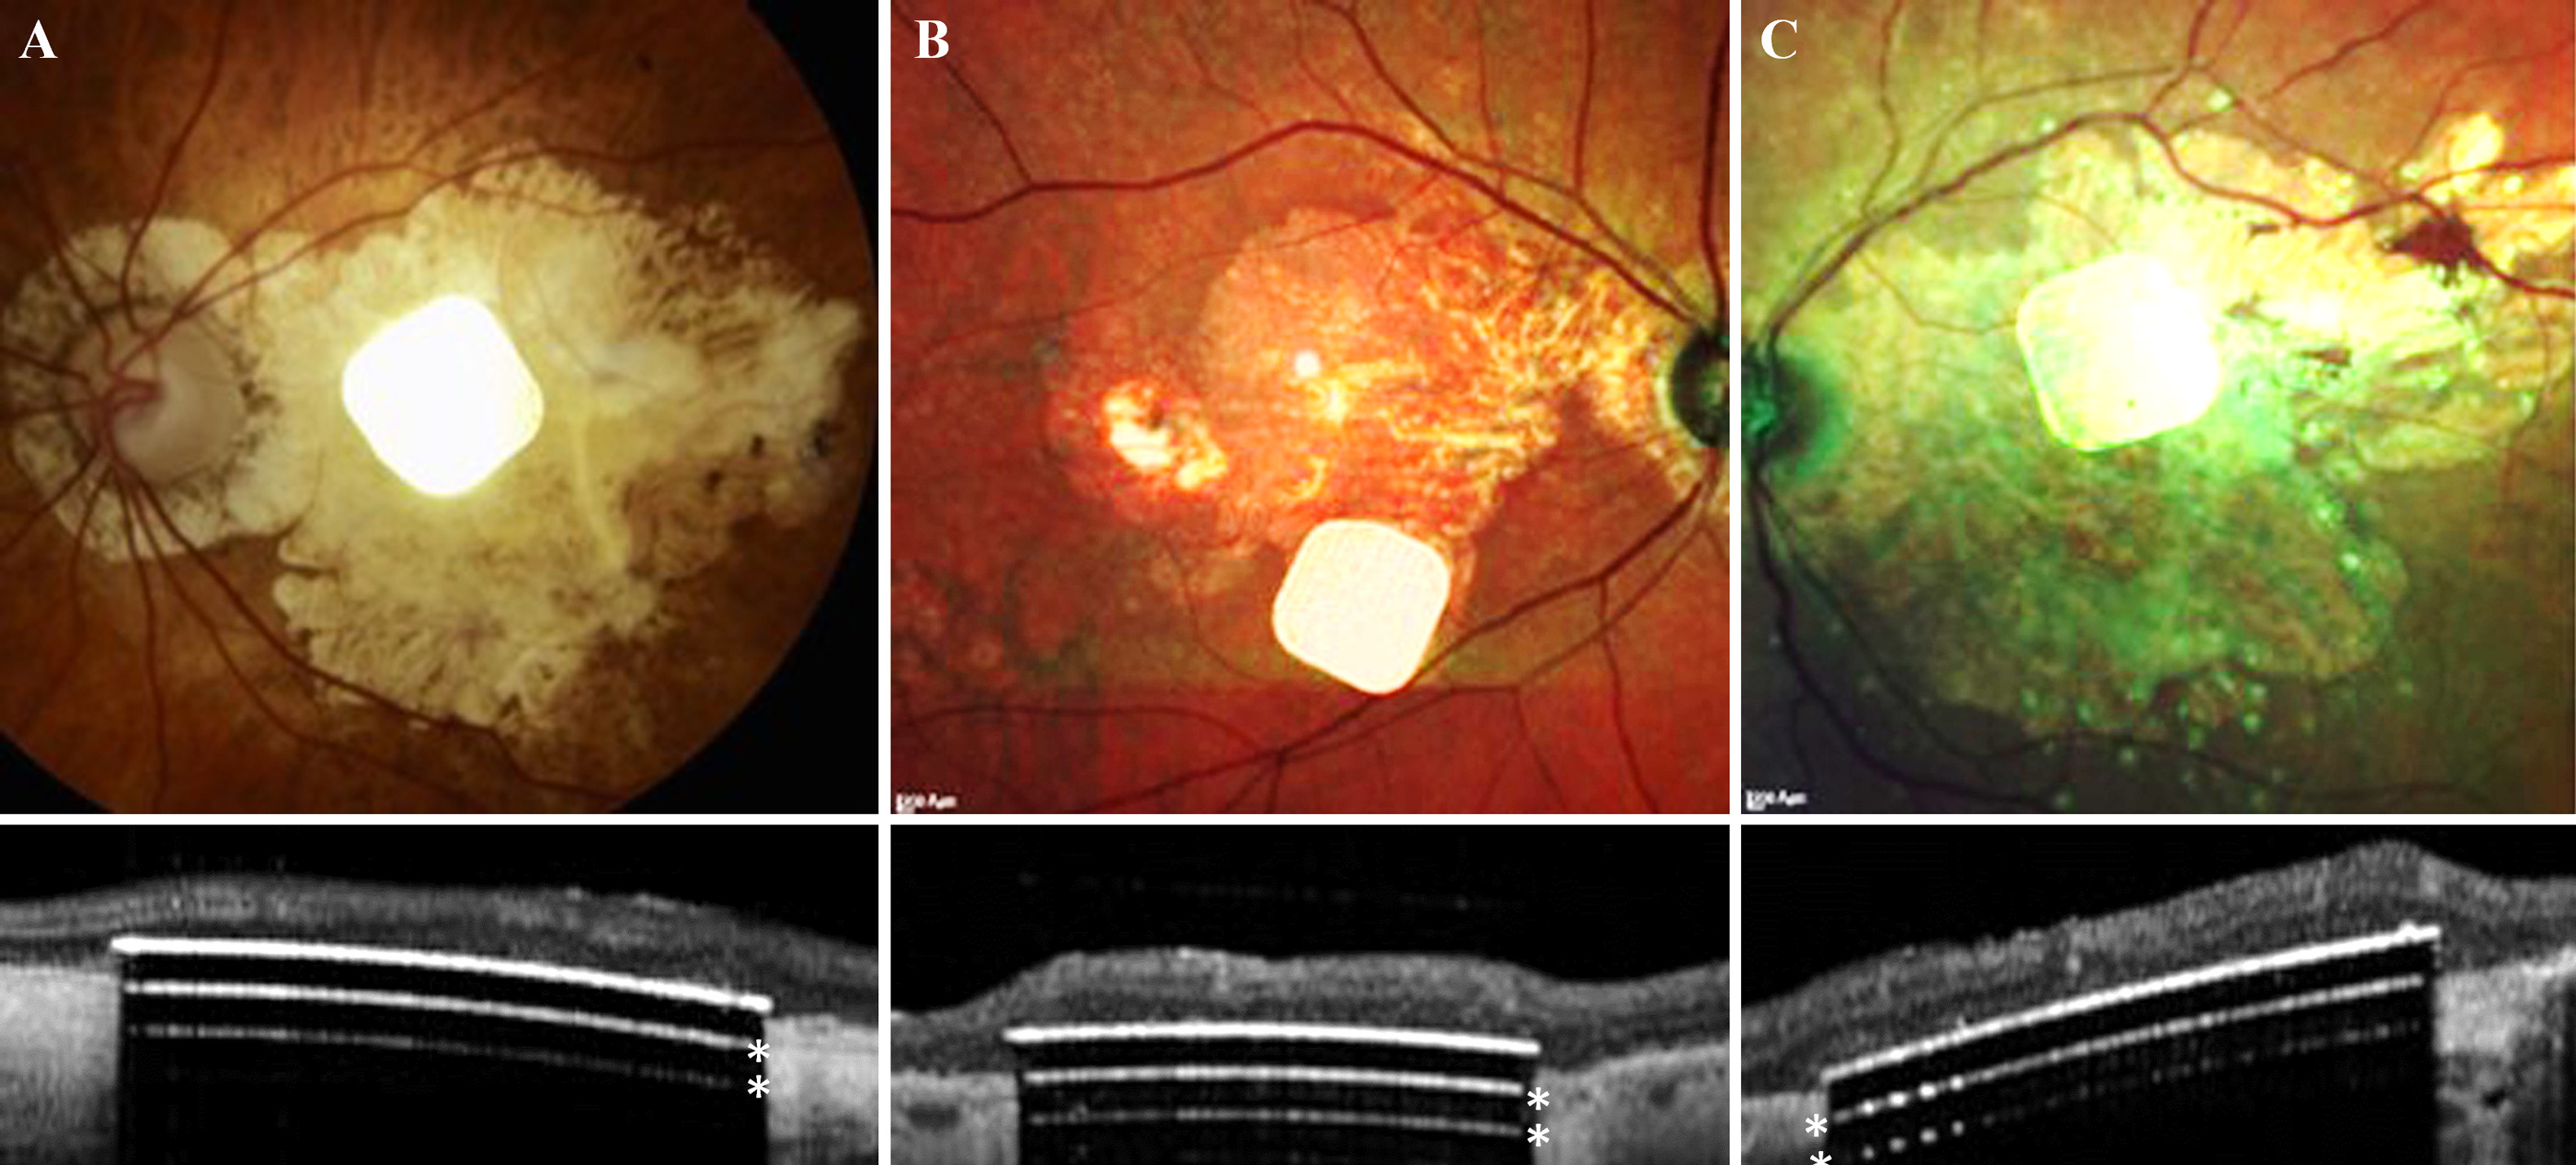 Subretinal implantation of Prima in subjects with GA suffering from profound vision loss due to AMD is feasible and well tolerated, according to this study. These photos and OCT scans show placement in the three successful subjects. (The two white lines below the implant surface (*) are OCT artifacts due to strong light reflection from the implant surface.)